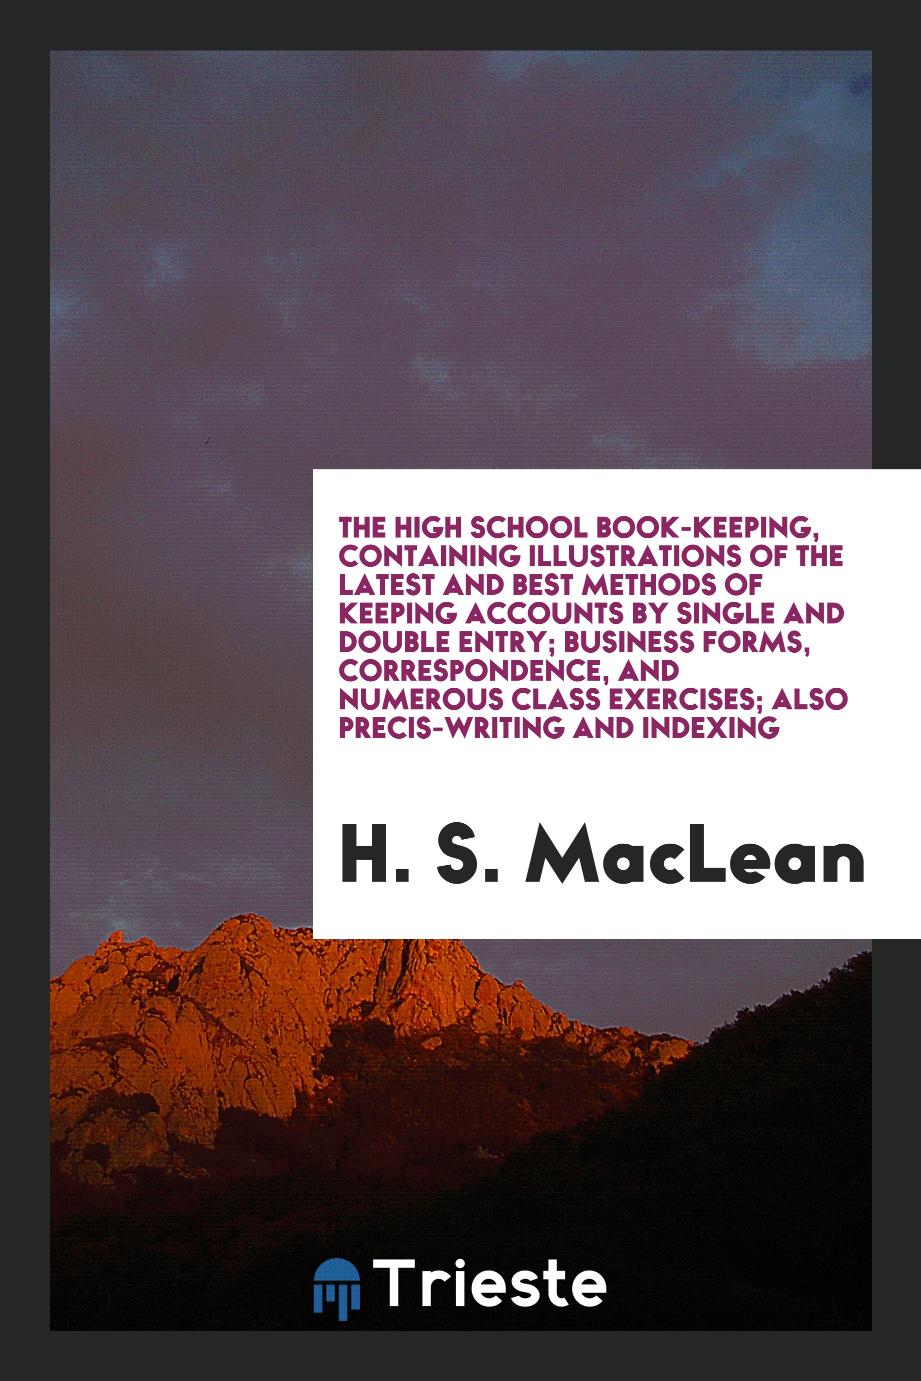 The High School Book-Keeping, Containing Illustrations of the Latest and Best Methods of Keeping Accounts by Single and Double Entry; Business Forms, Correspondence, and Numerous Class Exercises; Also Precis-Writing and Indexing